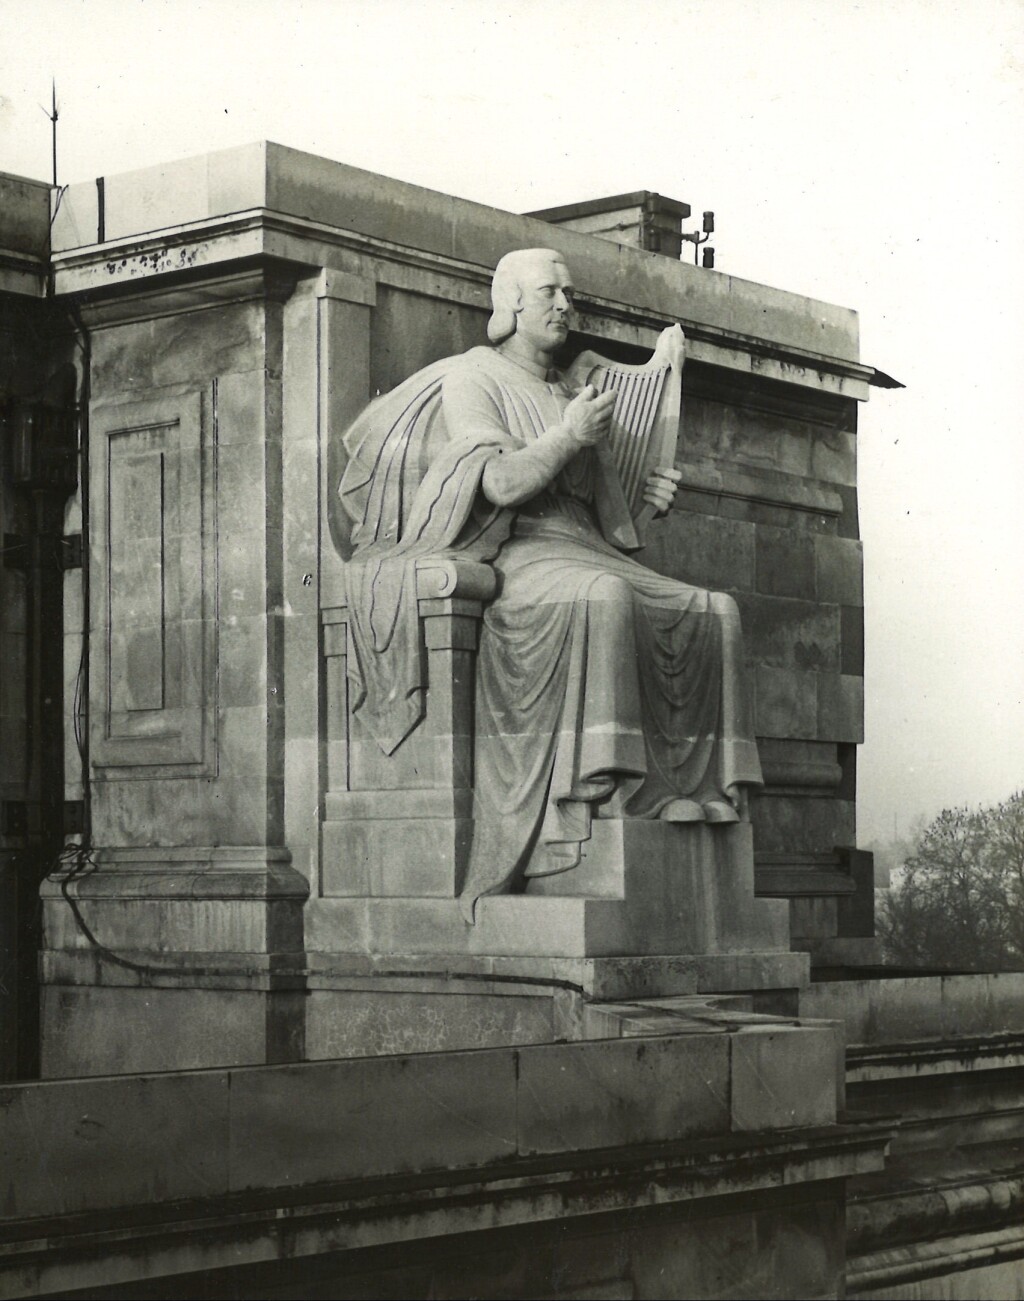 Black-and-white photograph of a stone sculpture of a seated man playing a small harp, set into the architecture of a building